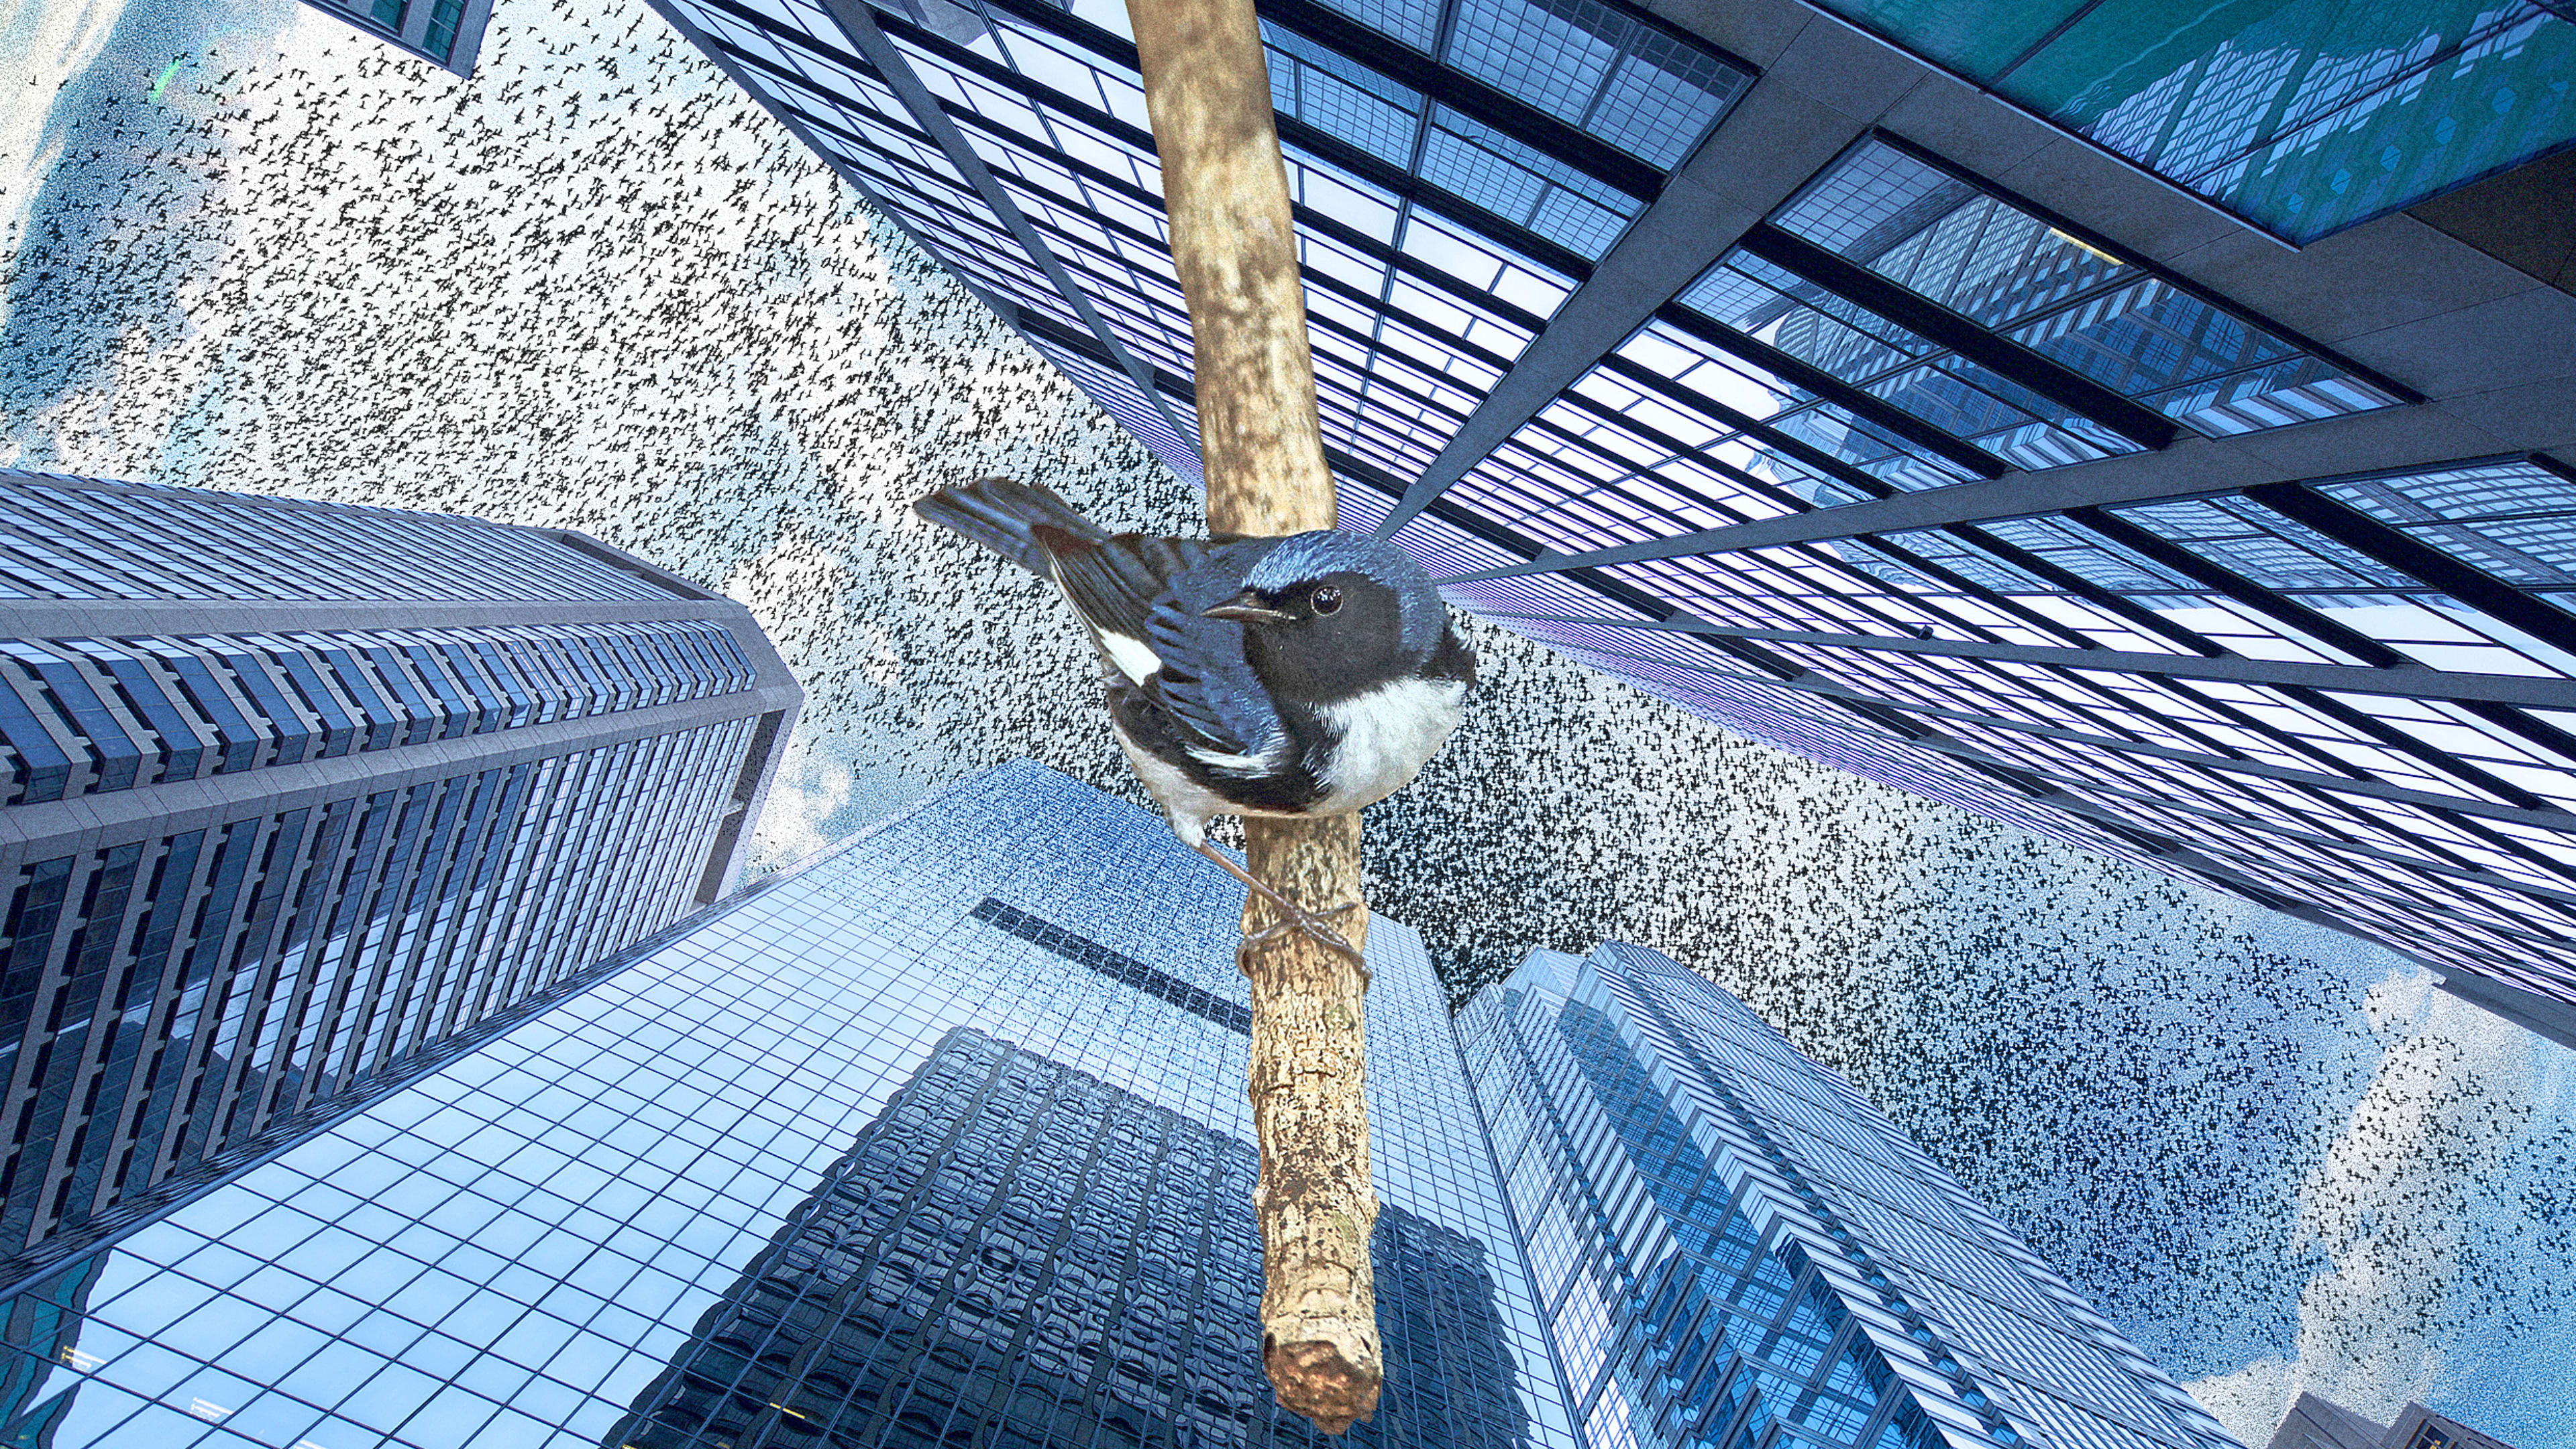 1,000 birds crashed into Philadelphia buildings overnight. No one knows why